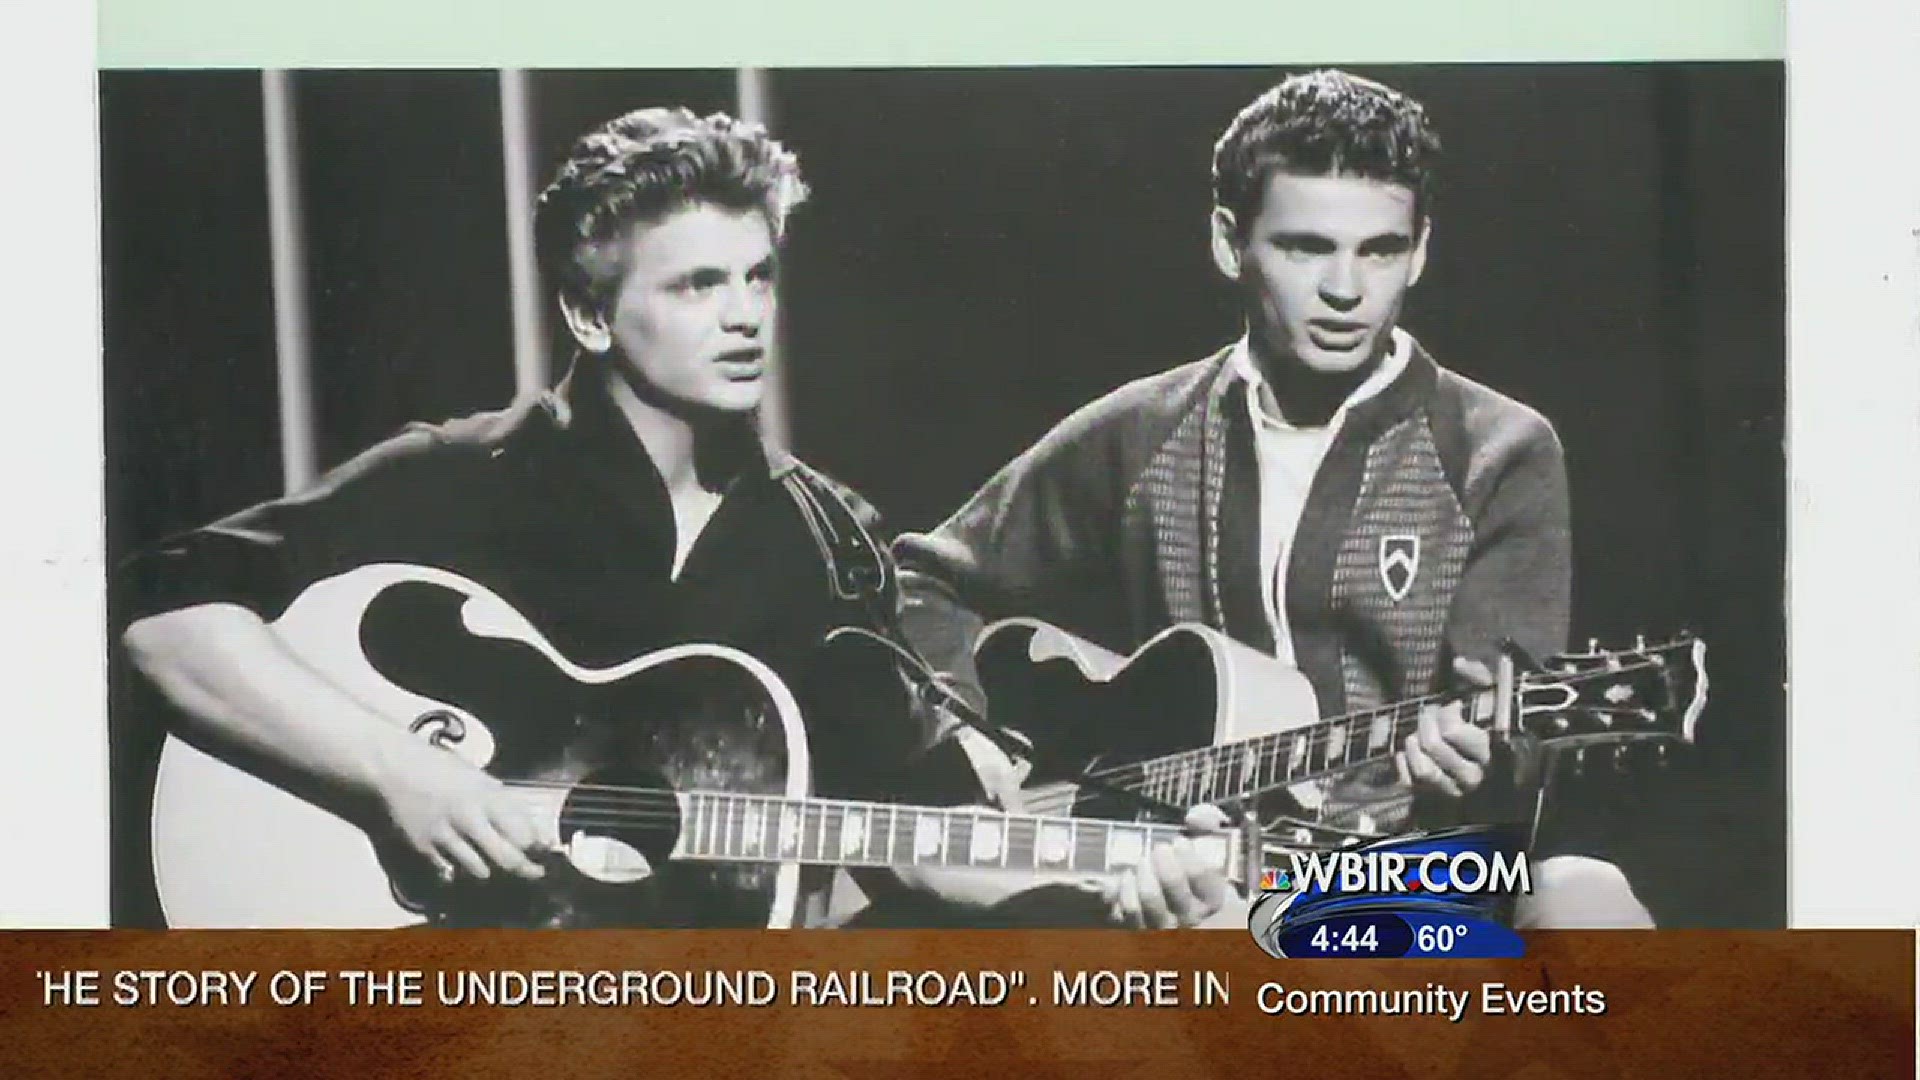 February 22, 2016Live at FIve at 4A look at plans for Everly Brothers Park in Knoxville.Donations and input from the community are encouraged, http://everlypark.org